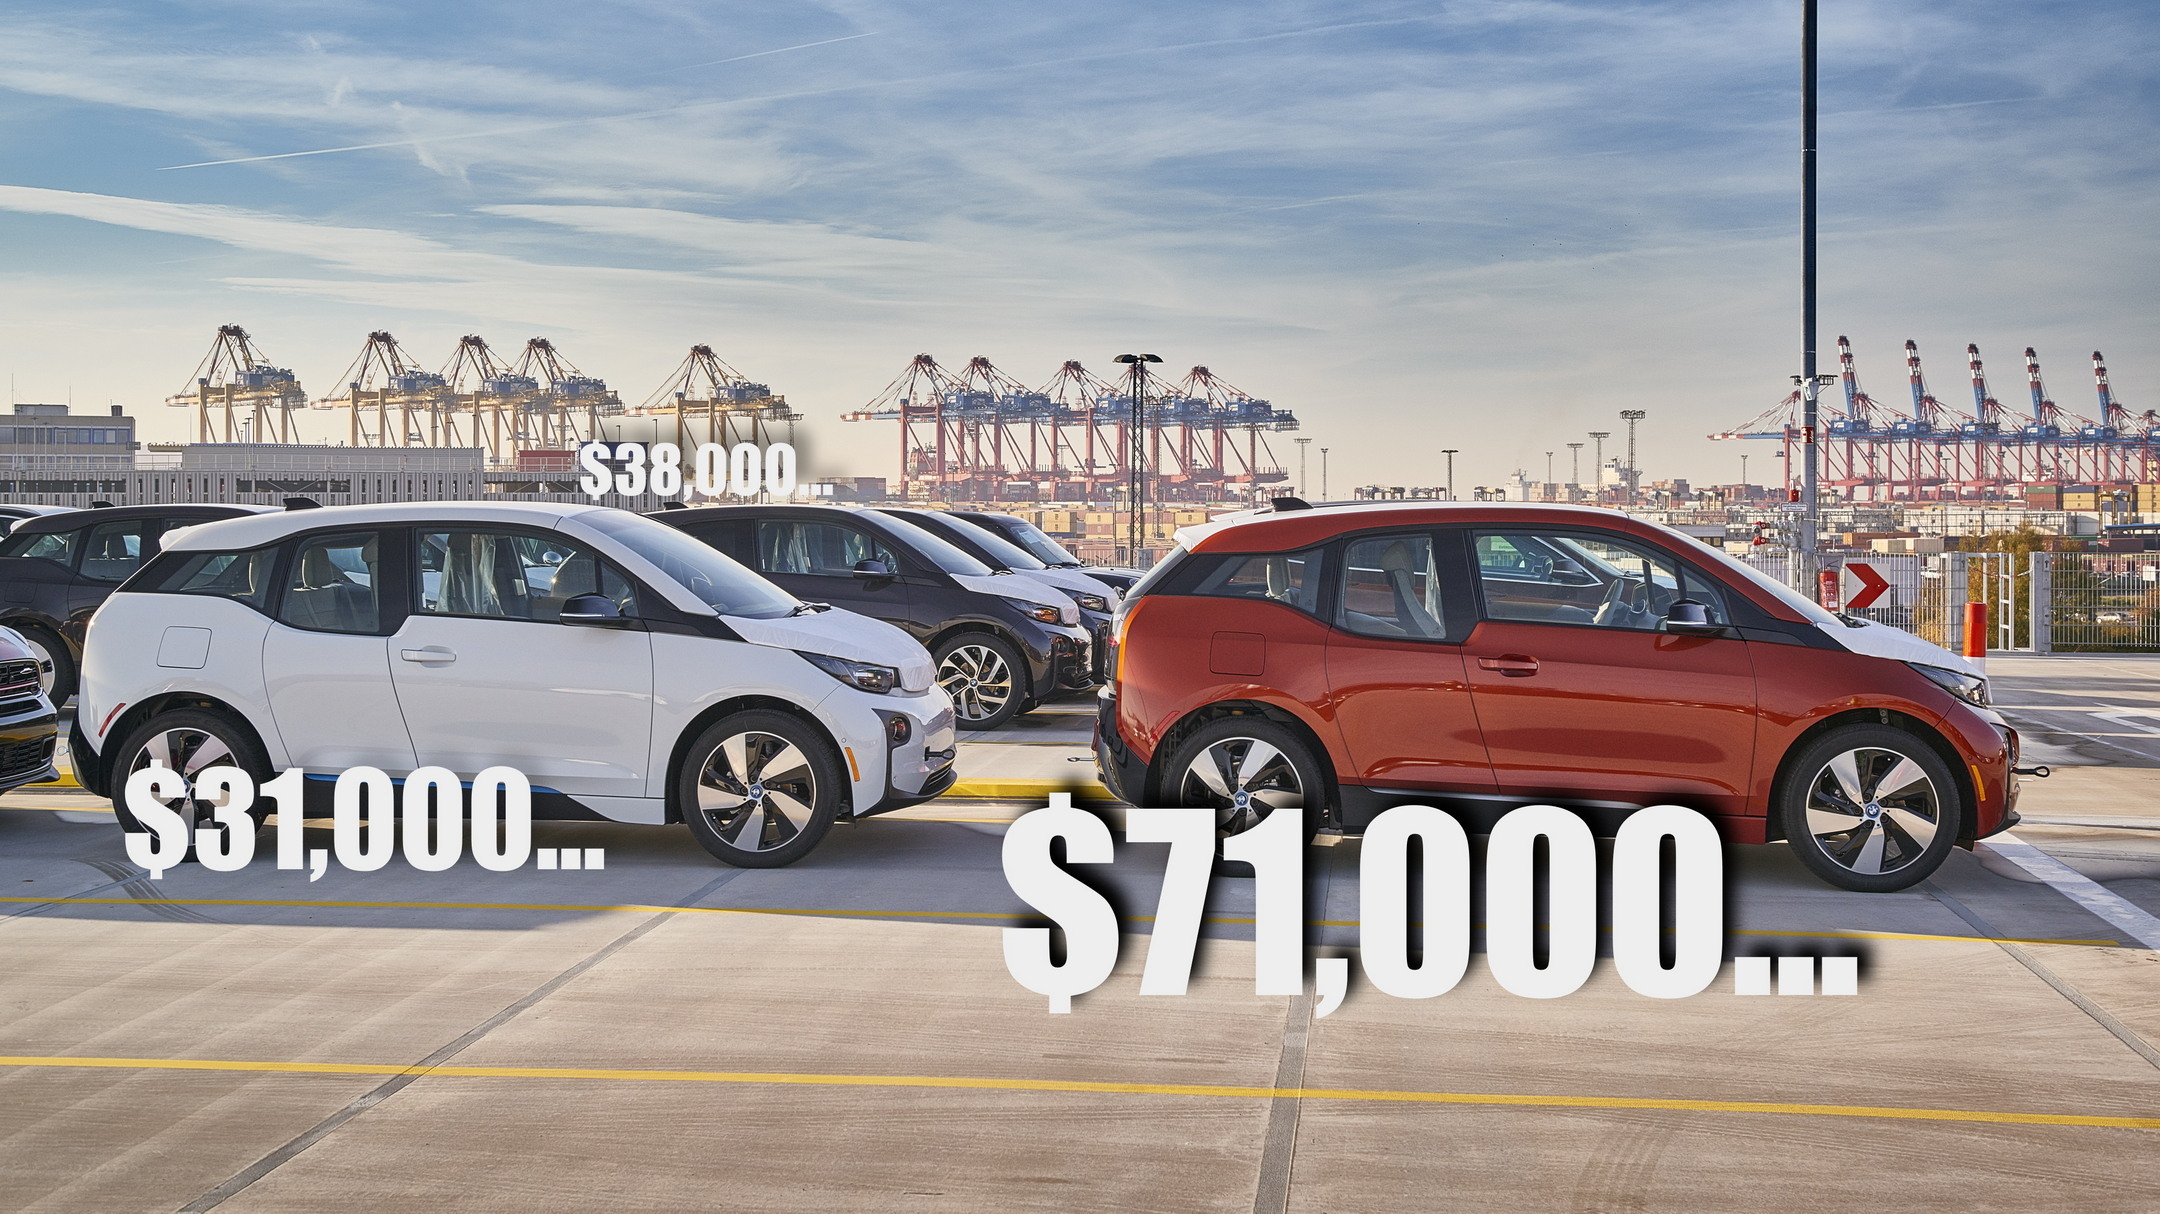 BMW i3 Owners Shocked By $30,000 Battery Replacement, One Quoted $71,000!